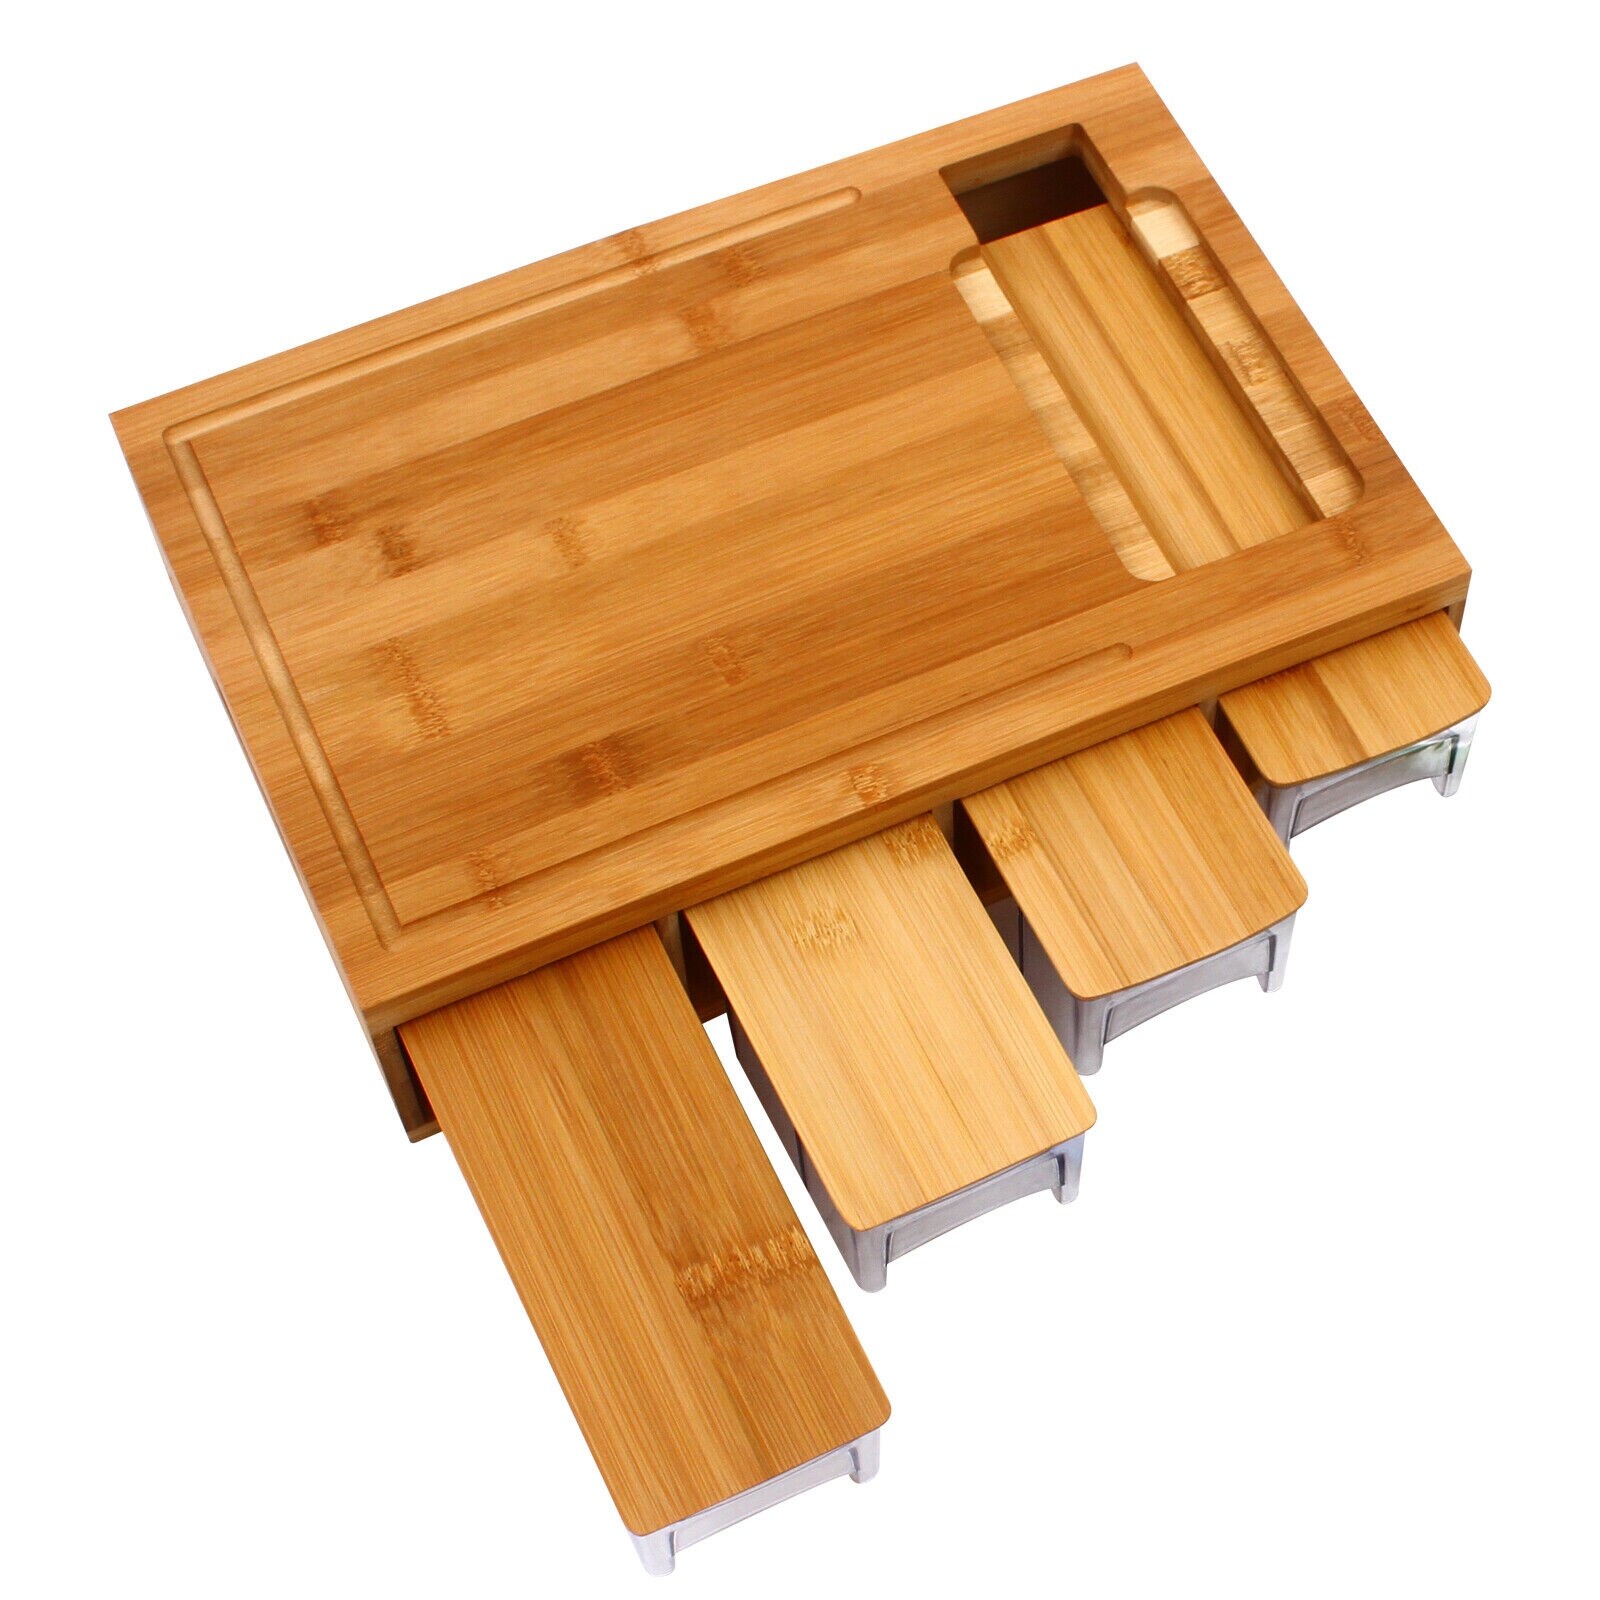 https://ak1.ostkcdn.com/images/products/is/images/direct/da4dfca1d0de38b6f739e2862d804a9590446ec5/Organic-Bamboo-Cutting-Board-with-4-Containers.jpg